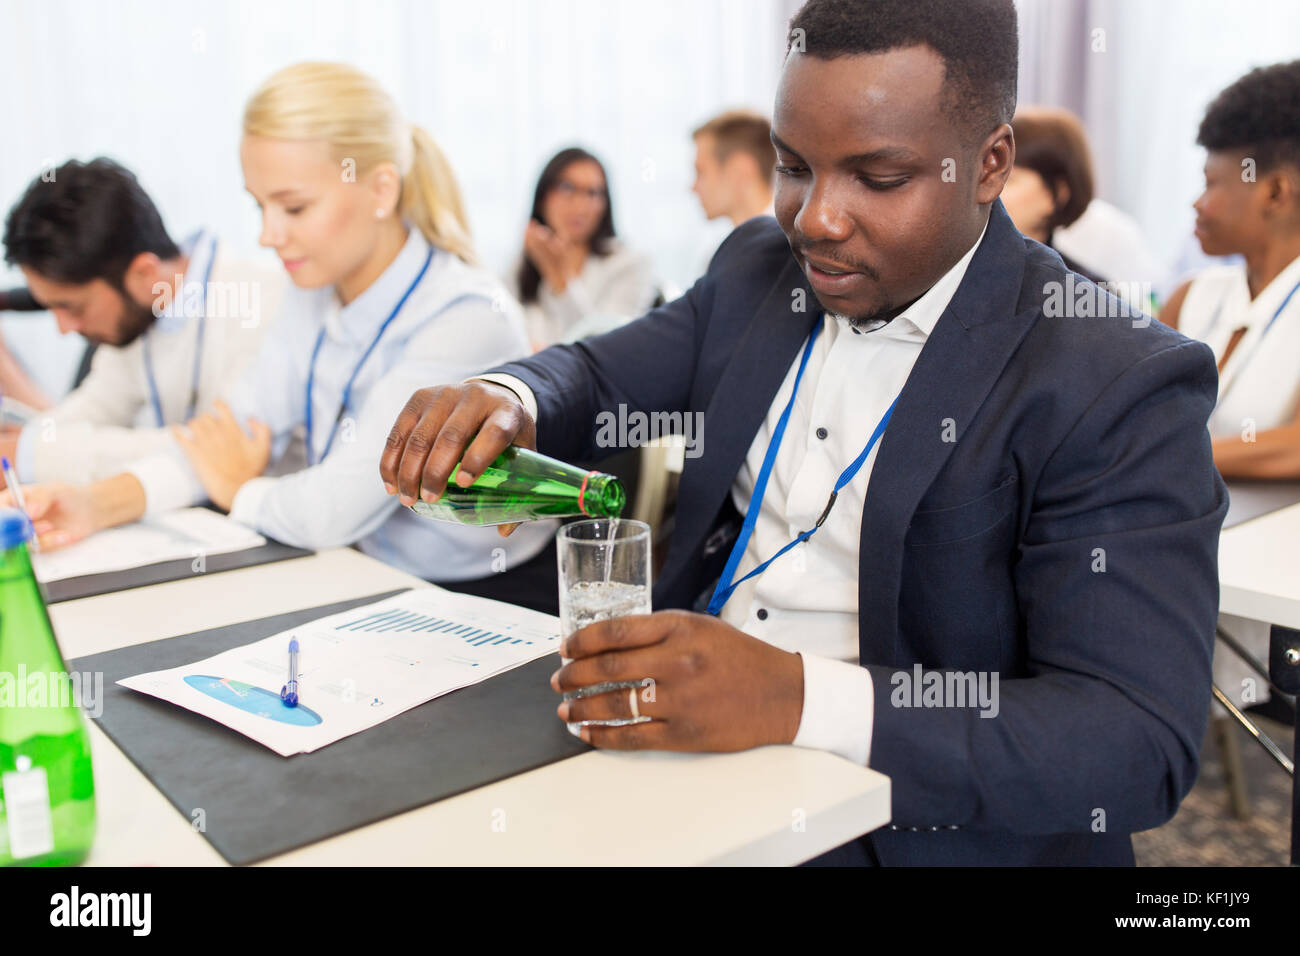 businessman drinking water at business conference Stock Photo